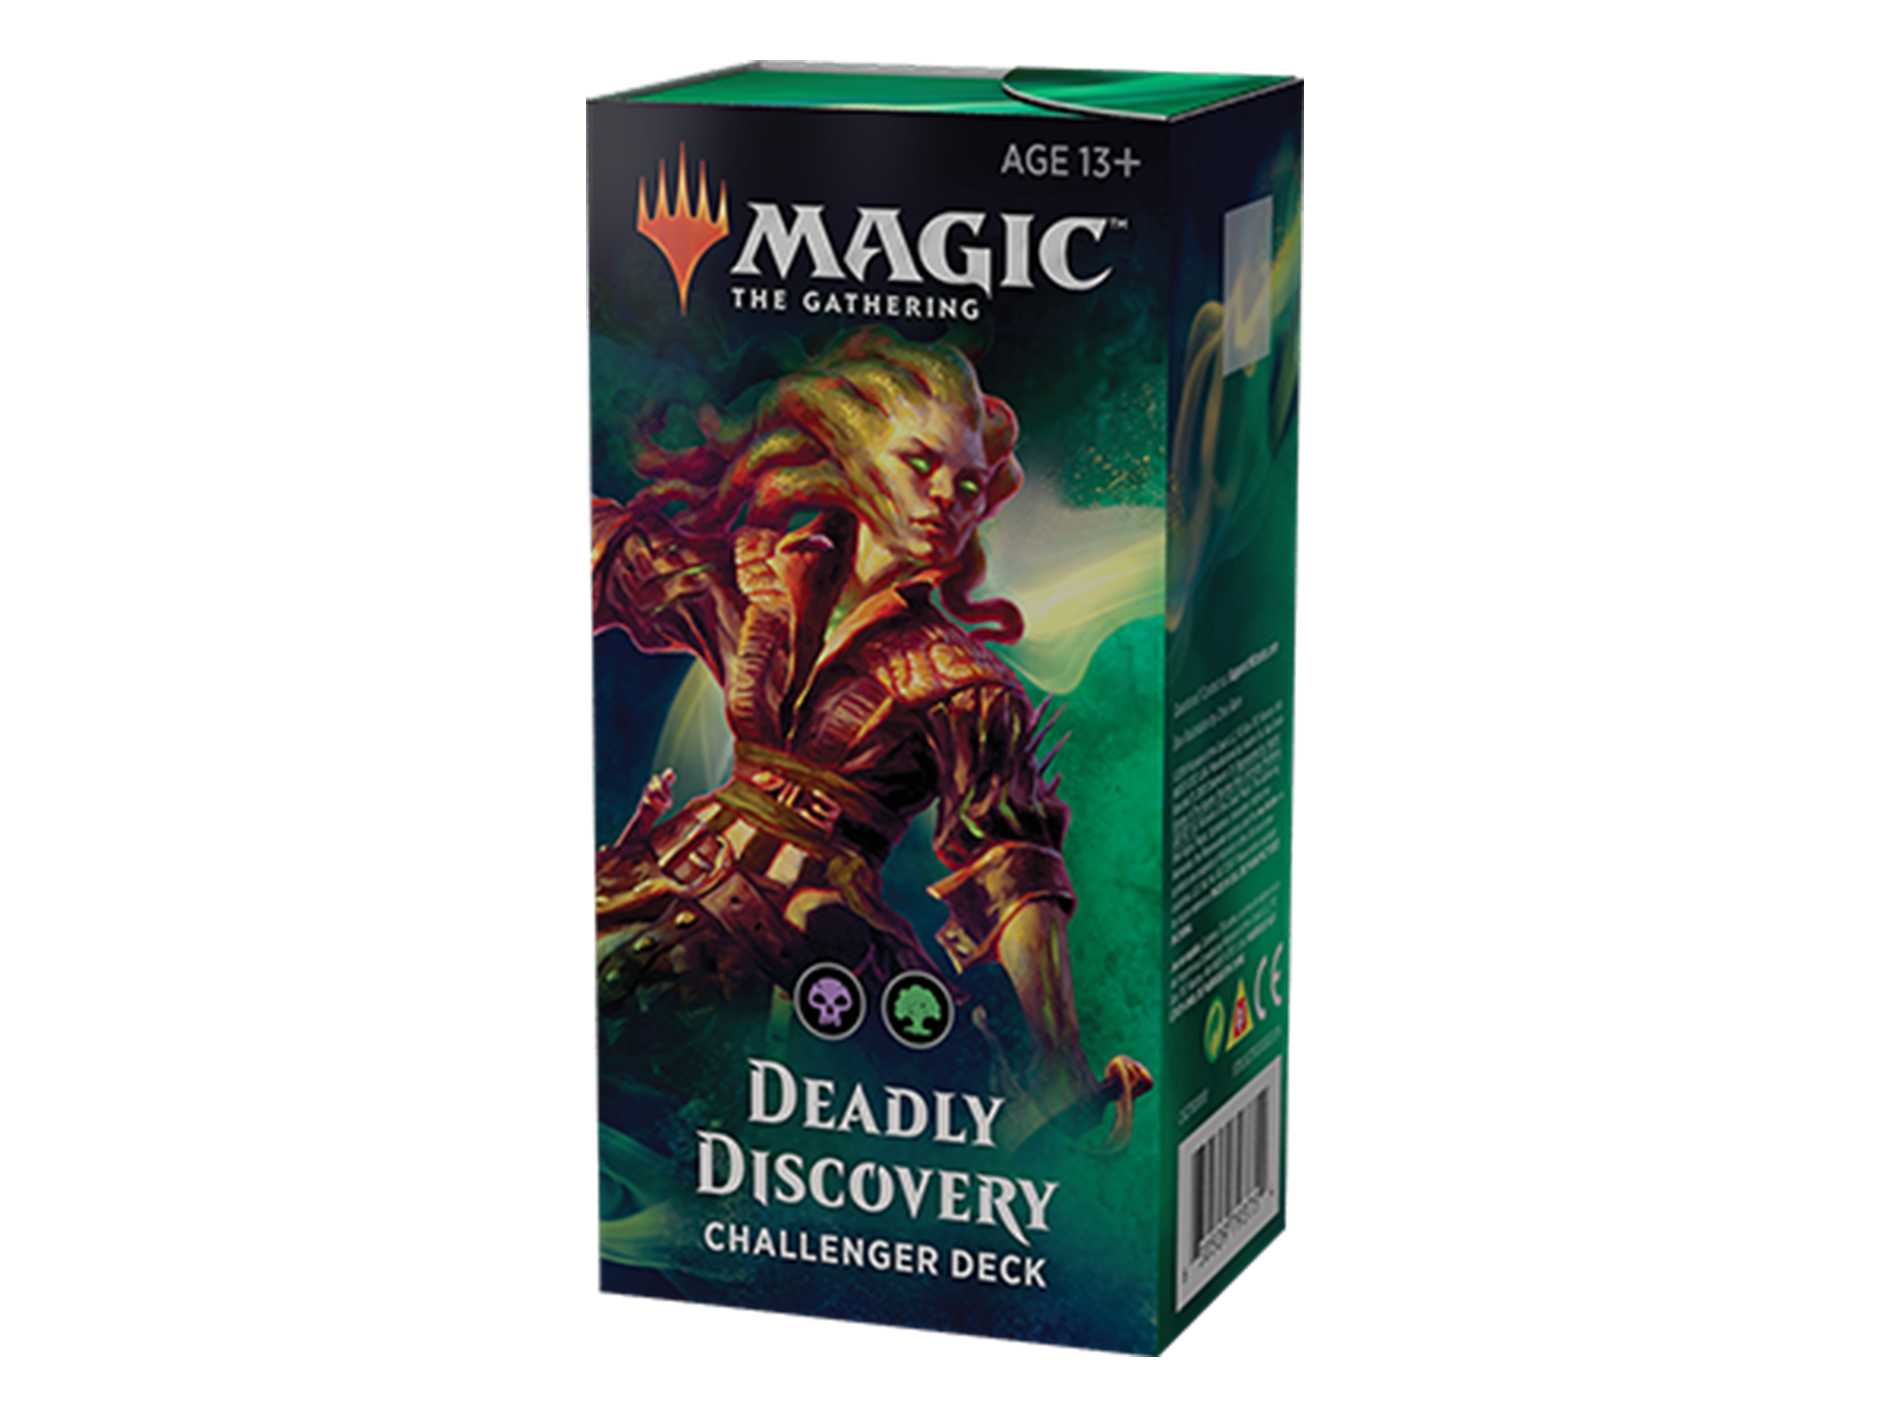 Copy of Magic The Gathering Challenger Deck 2019 - Deadly Discovery